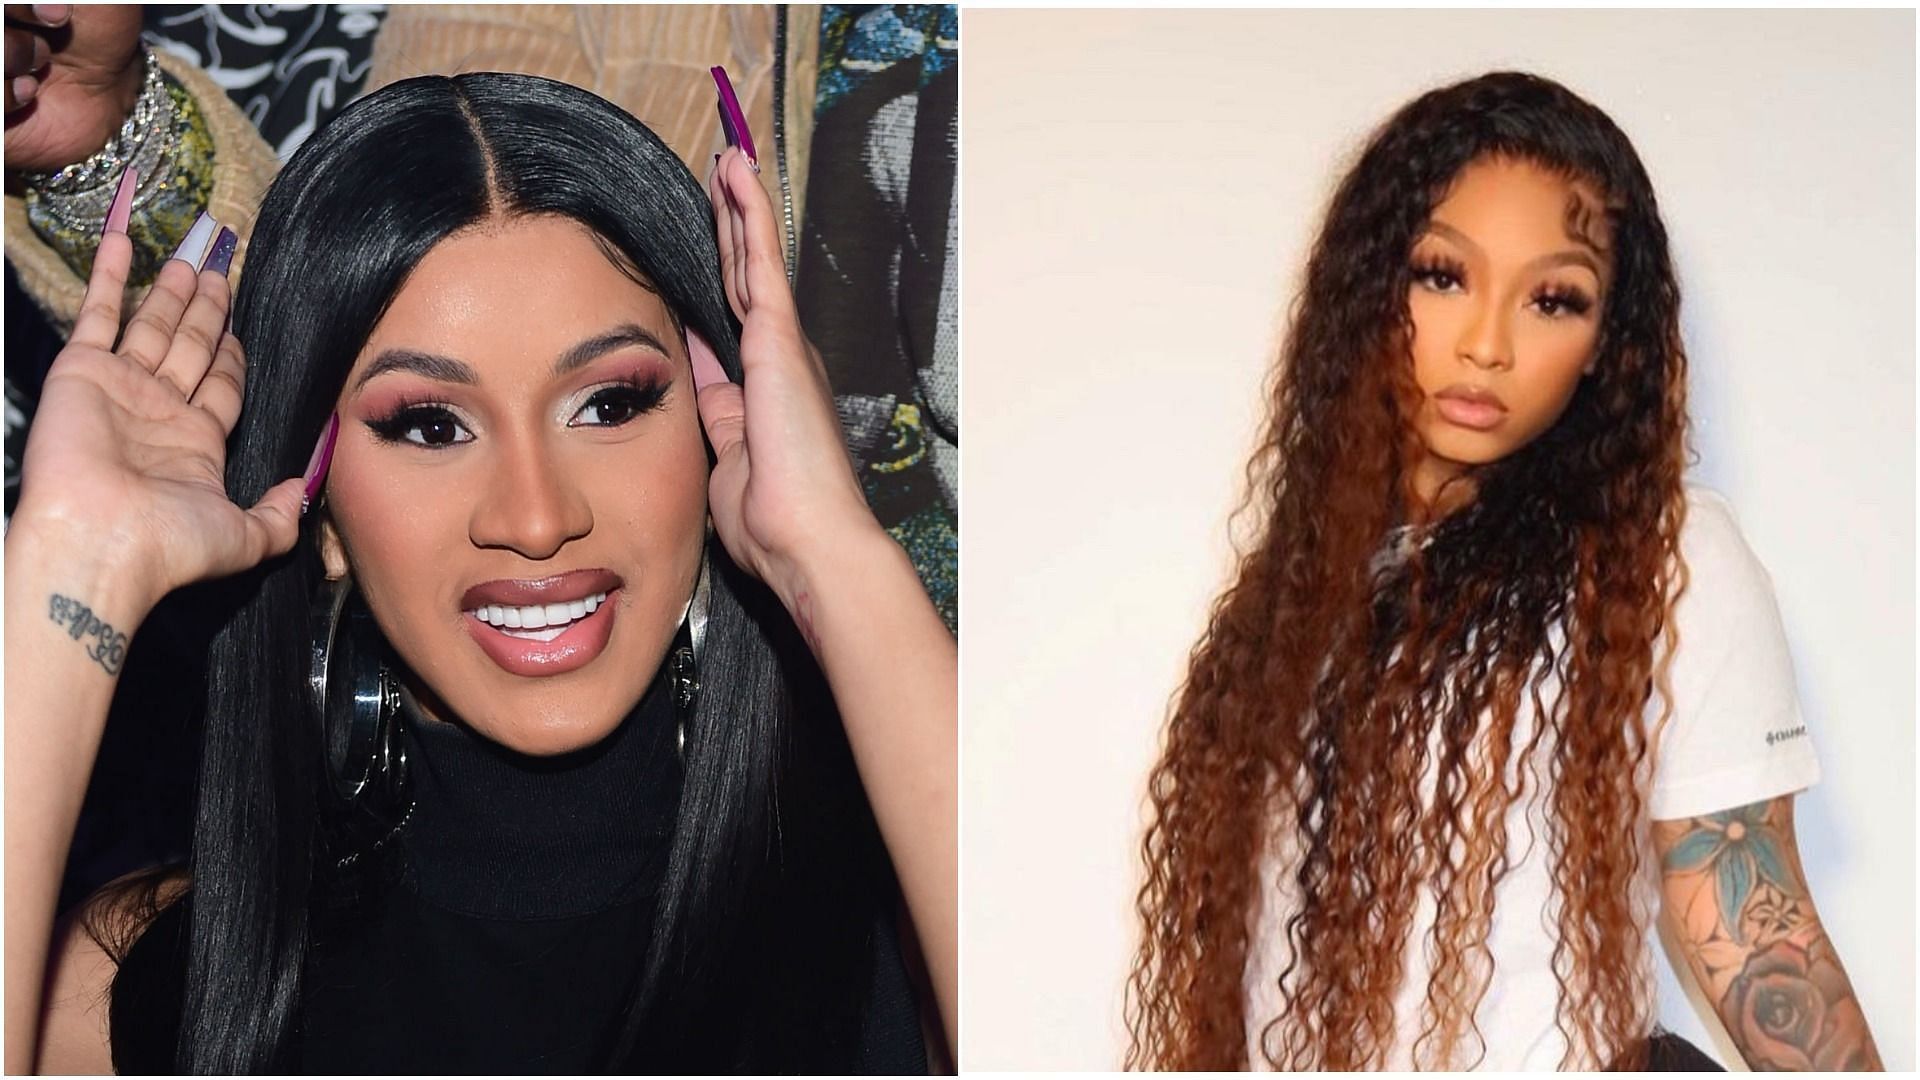 Cardi B and Cuban Doll had a heated exchange of words on Twitter (Images via Prince Williams/Getty Images and CubanDaSavage/Twitter)